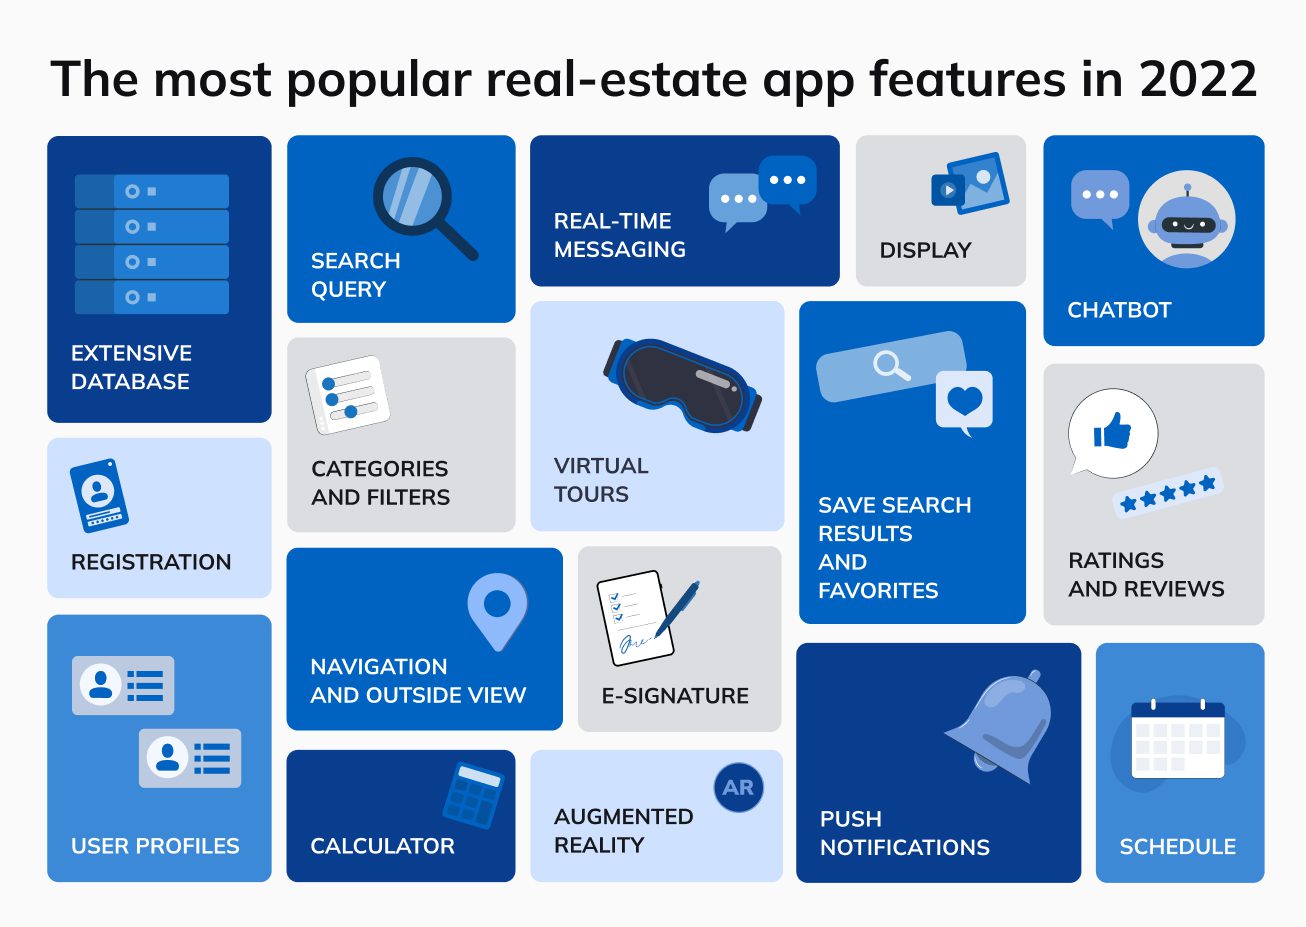 The most popular real estate app features in 2022